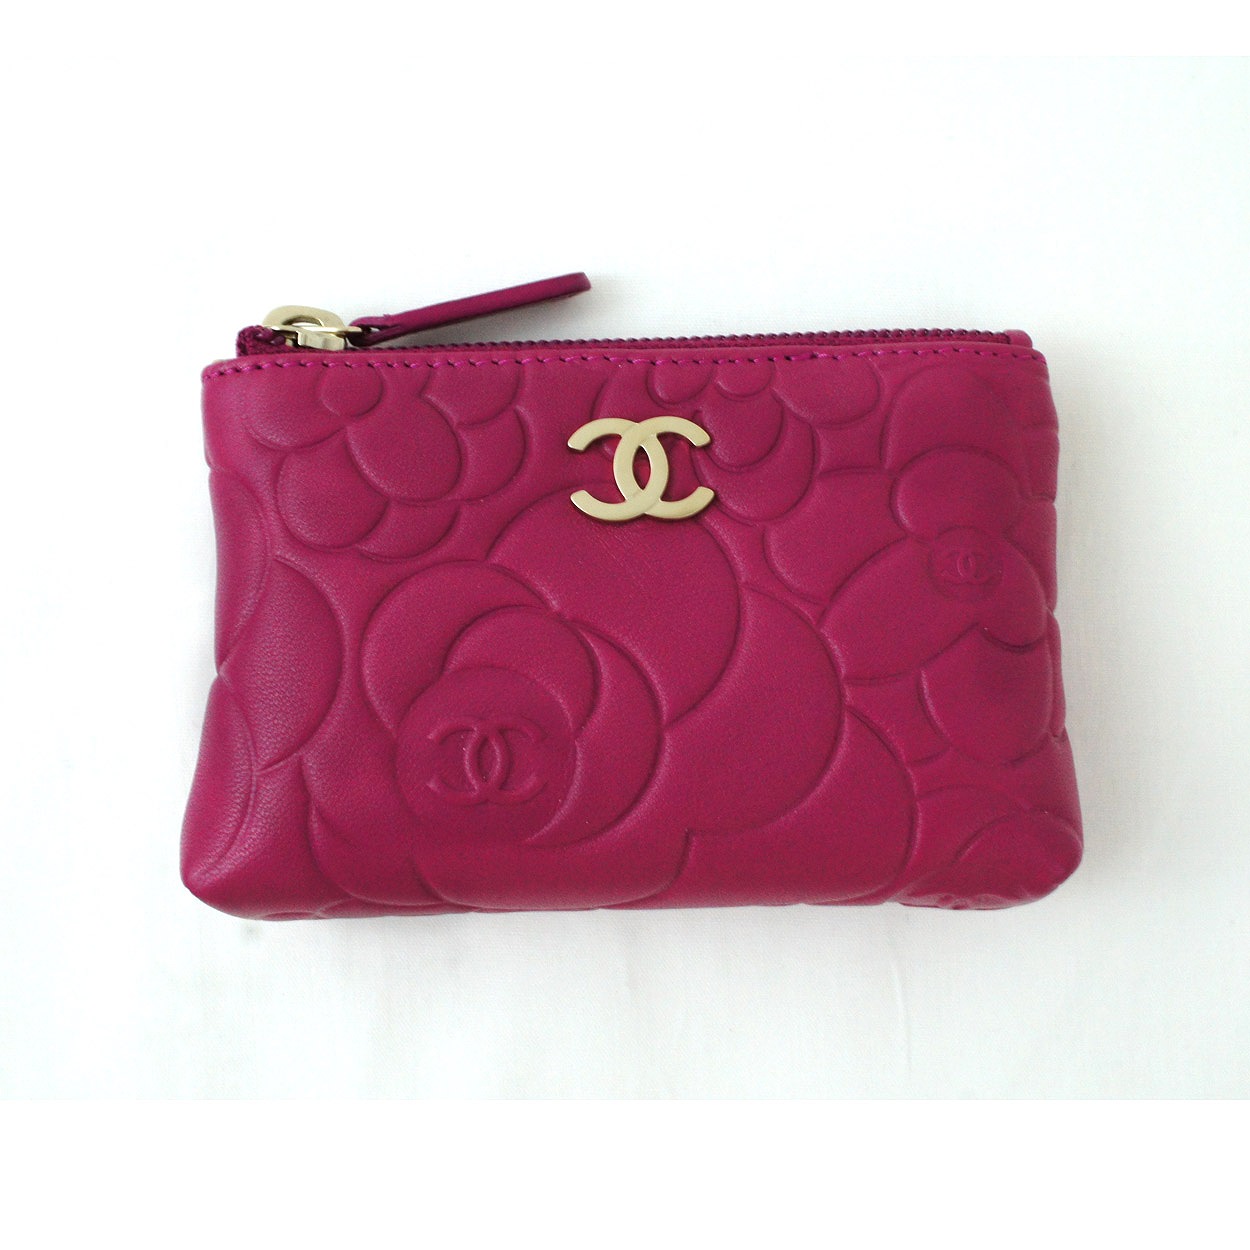 Women's :: Wallets and Coin Cases :: Key Cases :: CHANEL Camellia fuschia  pink Lambskin coin purse / key case Gold CC